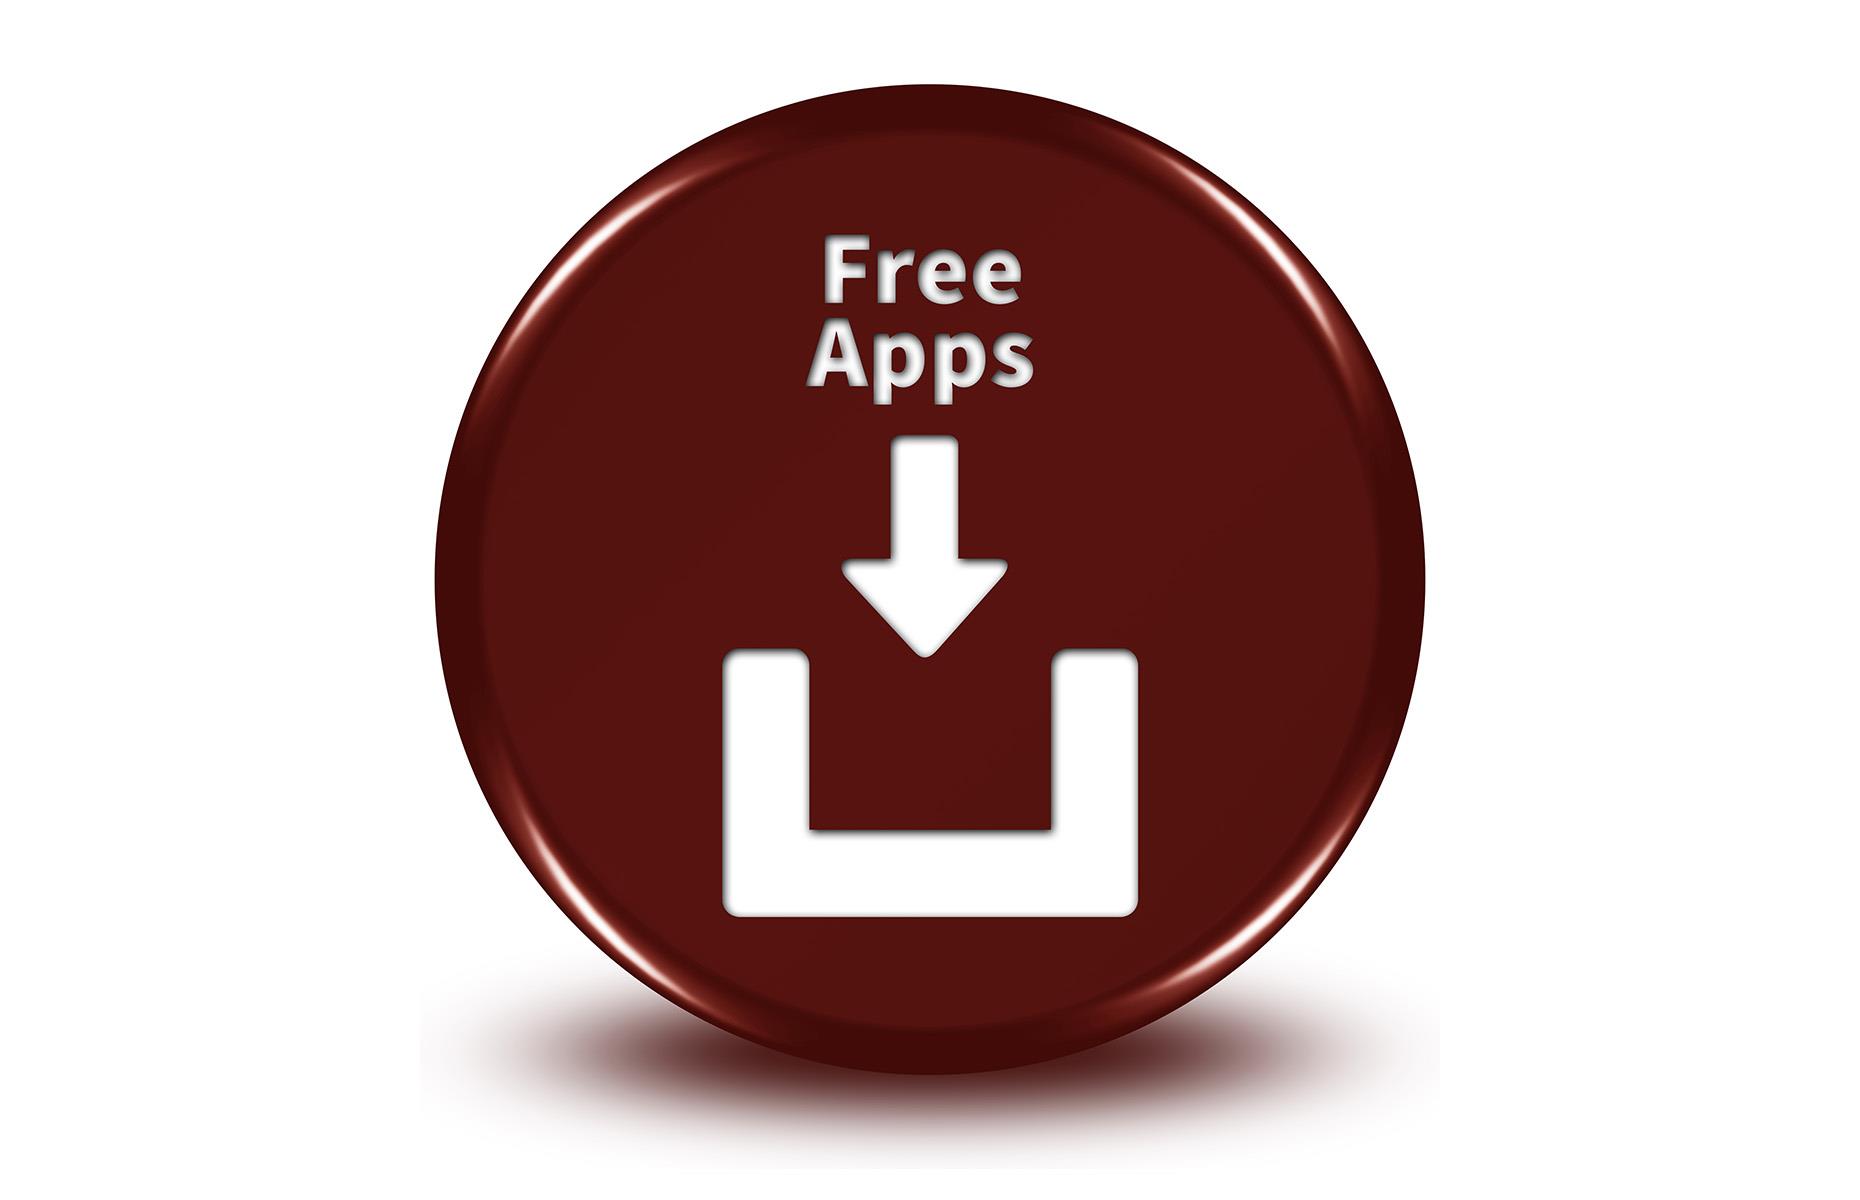 We give away too much in exchange for ‘free’ apps